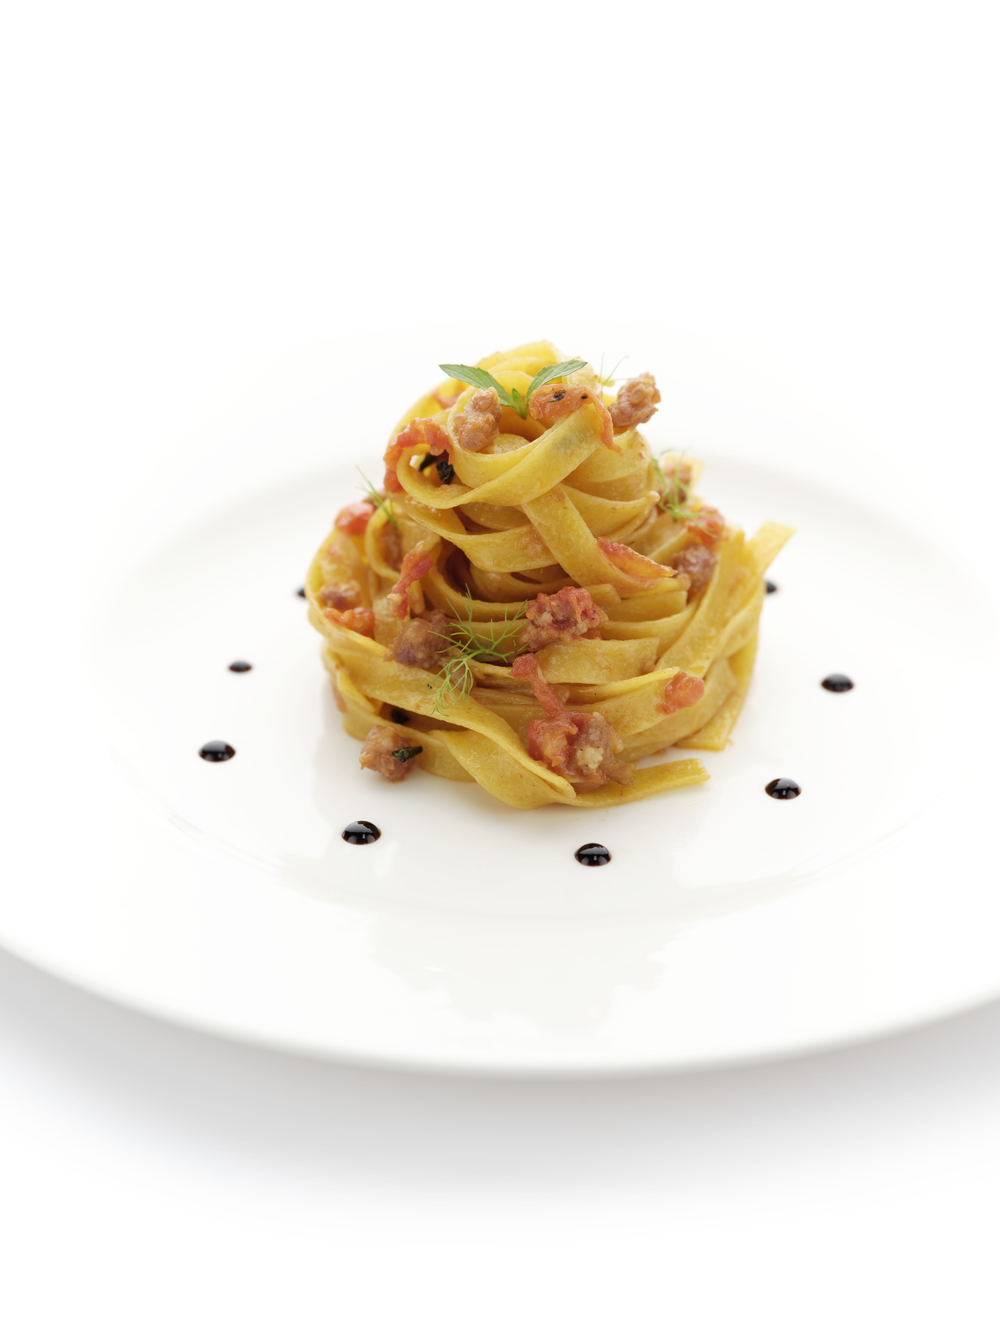 Fettuccine with sausage and balsamic vinegar